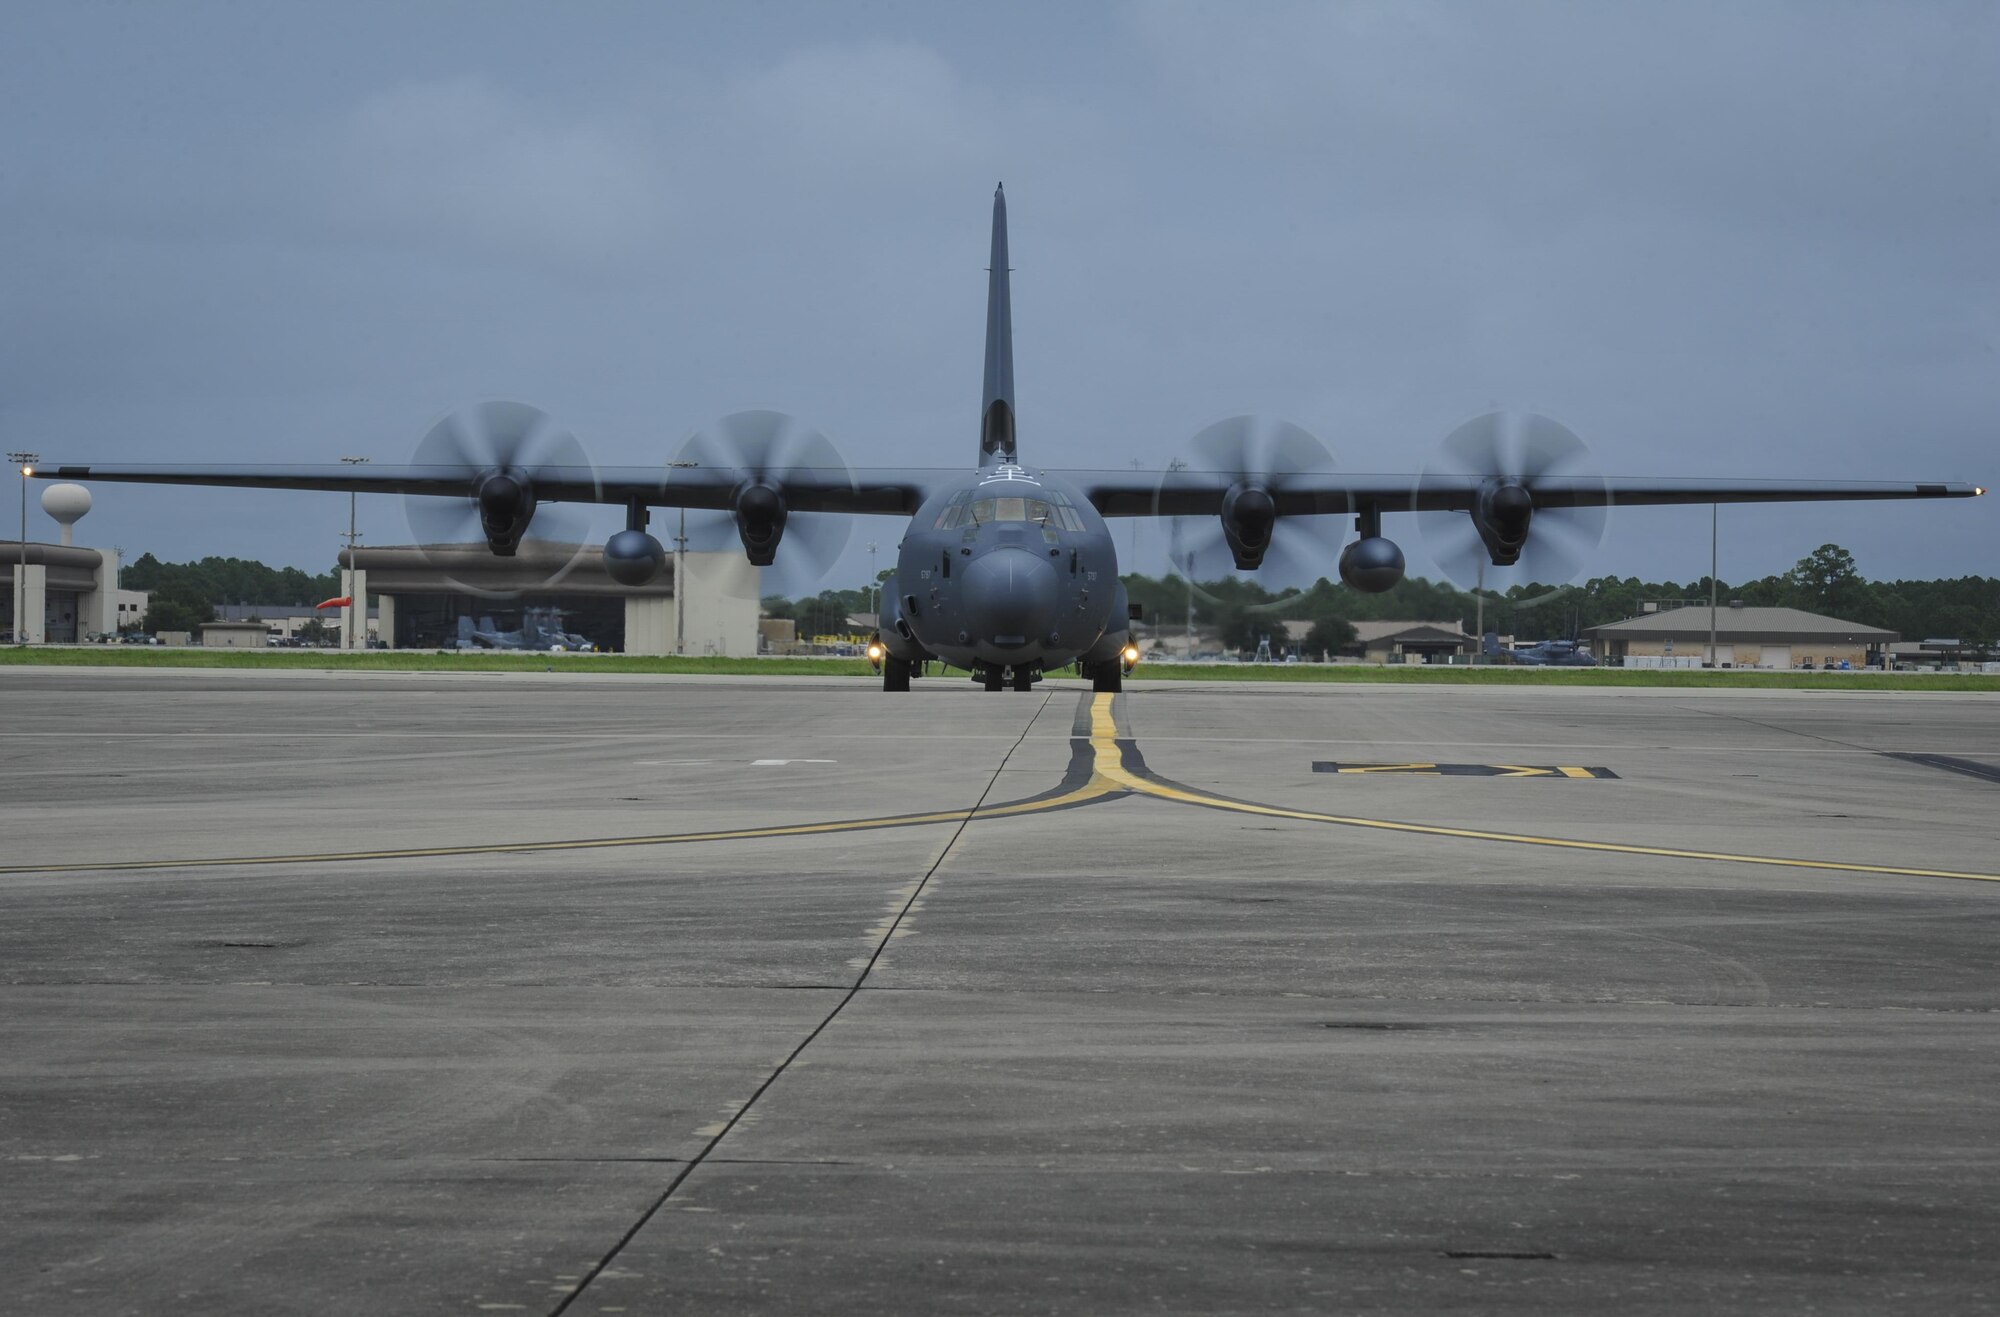 An MC-130J Commando II taxis down the runway at Hurlburt Field, Fla., Aug. 11, 2016. This aircraft is scheduled to be modified into an AC-130J Ghostrider gunship in the coming months. The Ghostrider will have a 105 mm cannon and will be operationally tested here. (U.S. Air Force photo by Airman 1st Class Joseph Pick)